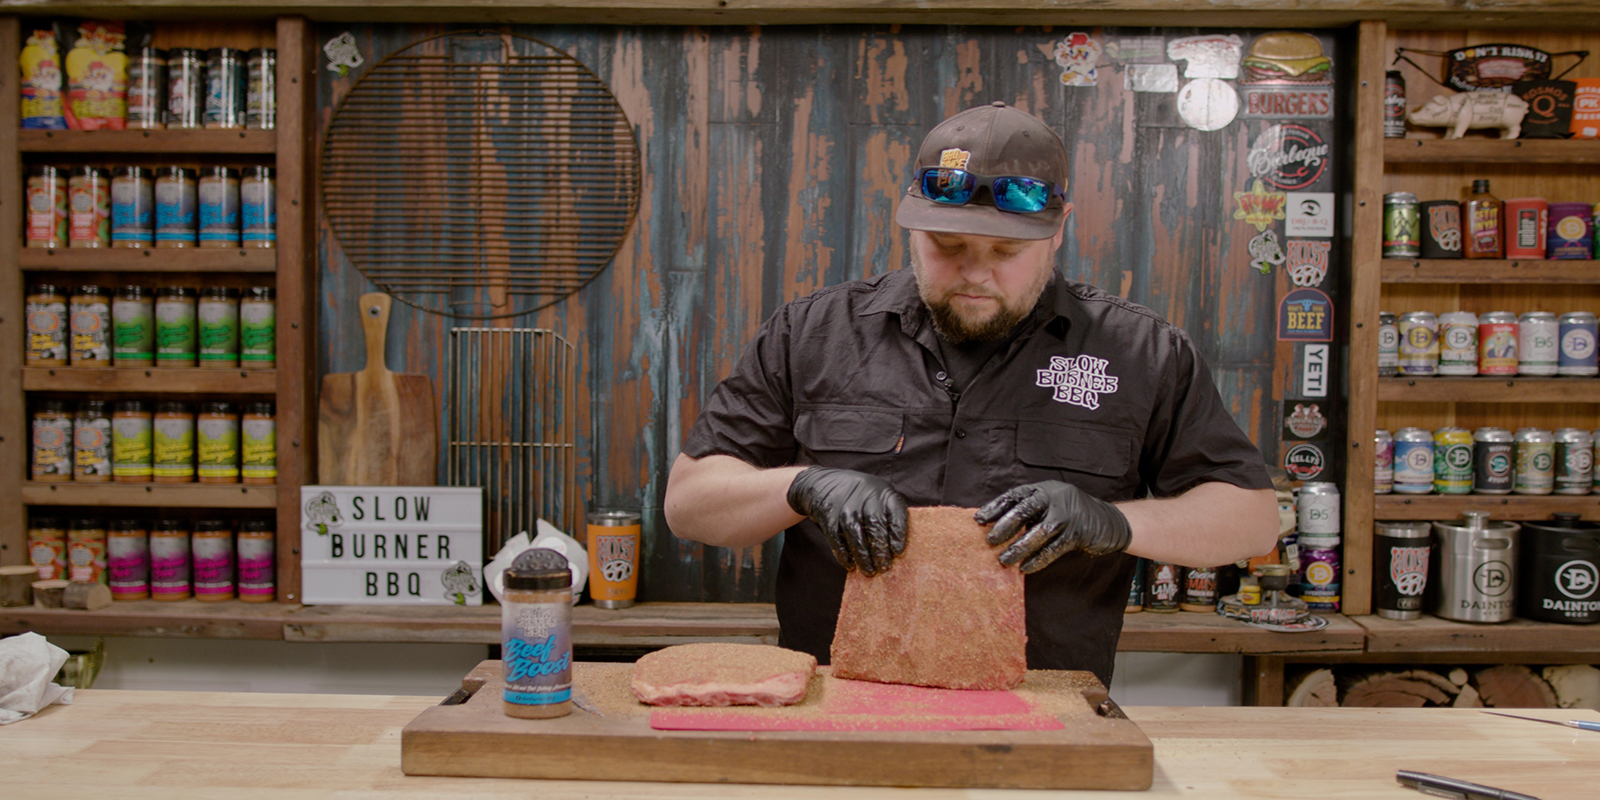 This image shows westy from slow burner bbq seasoning the beef short rib